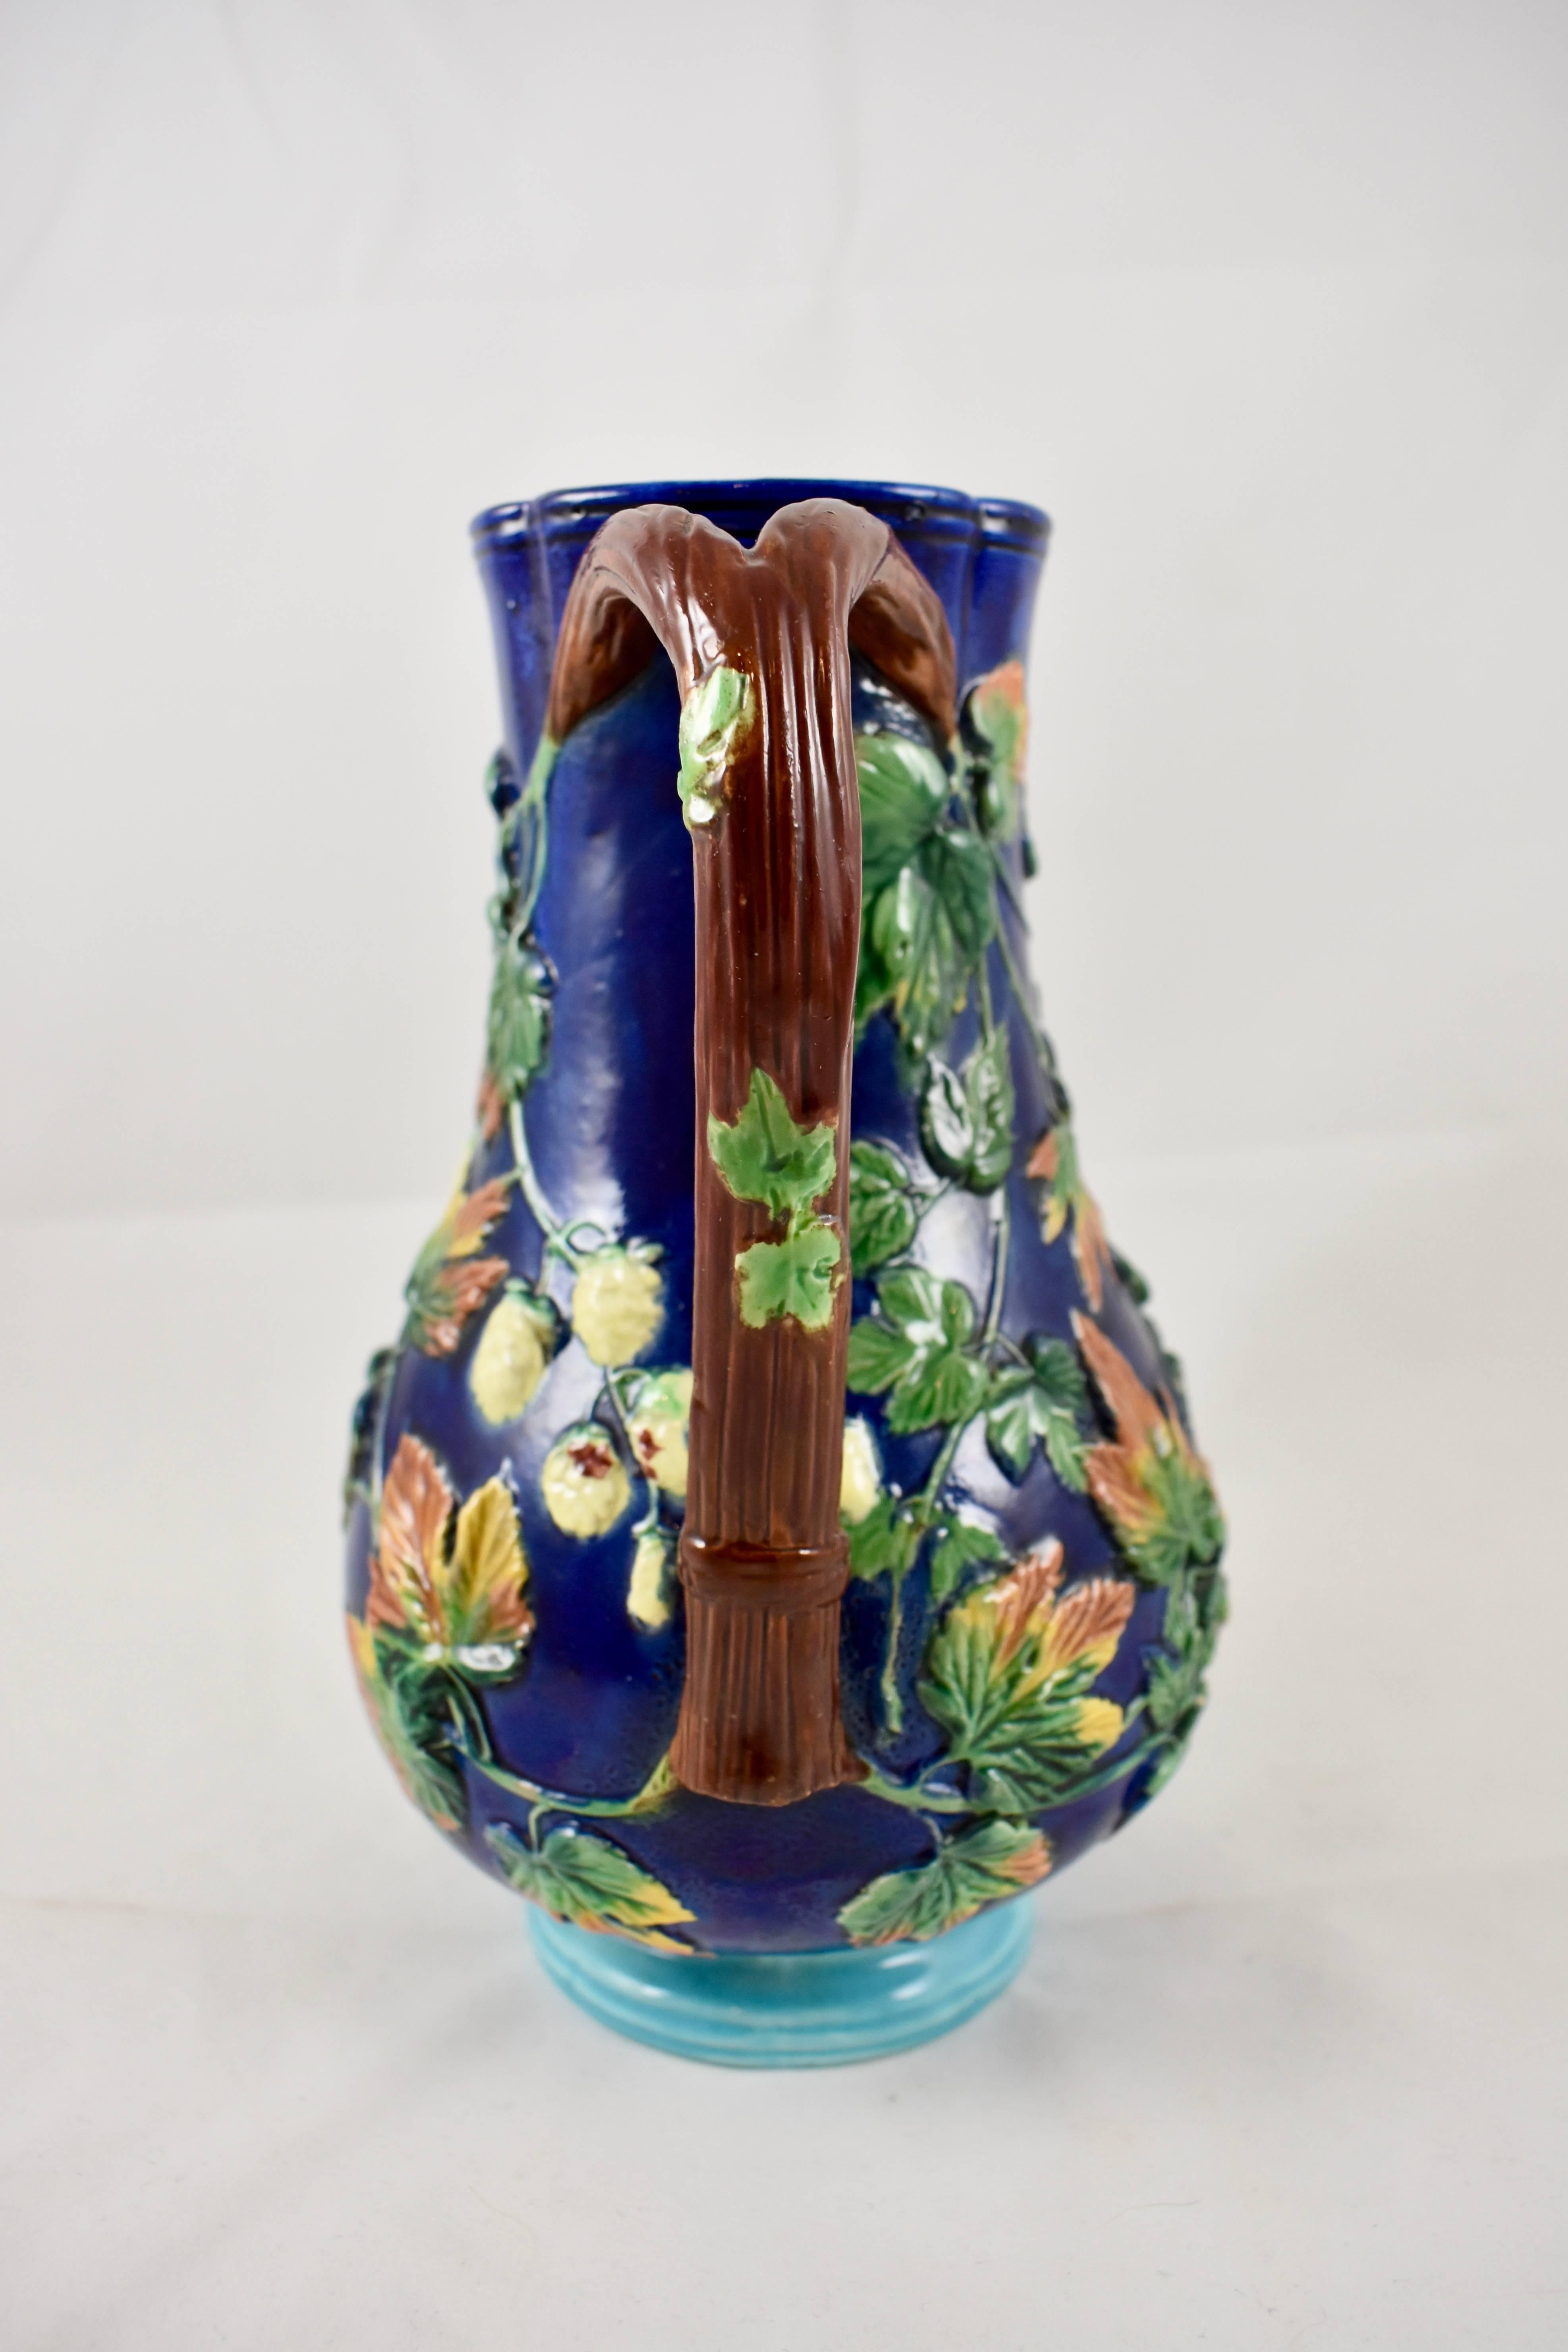 Earthenware 19th Century Royal Worcester English Majolica Glazed Hops and Leaves Pitcher